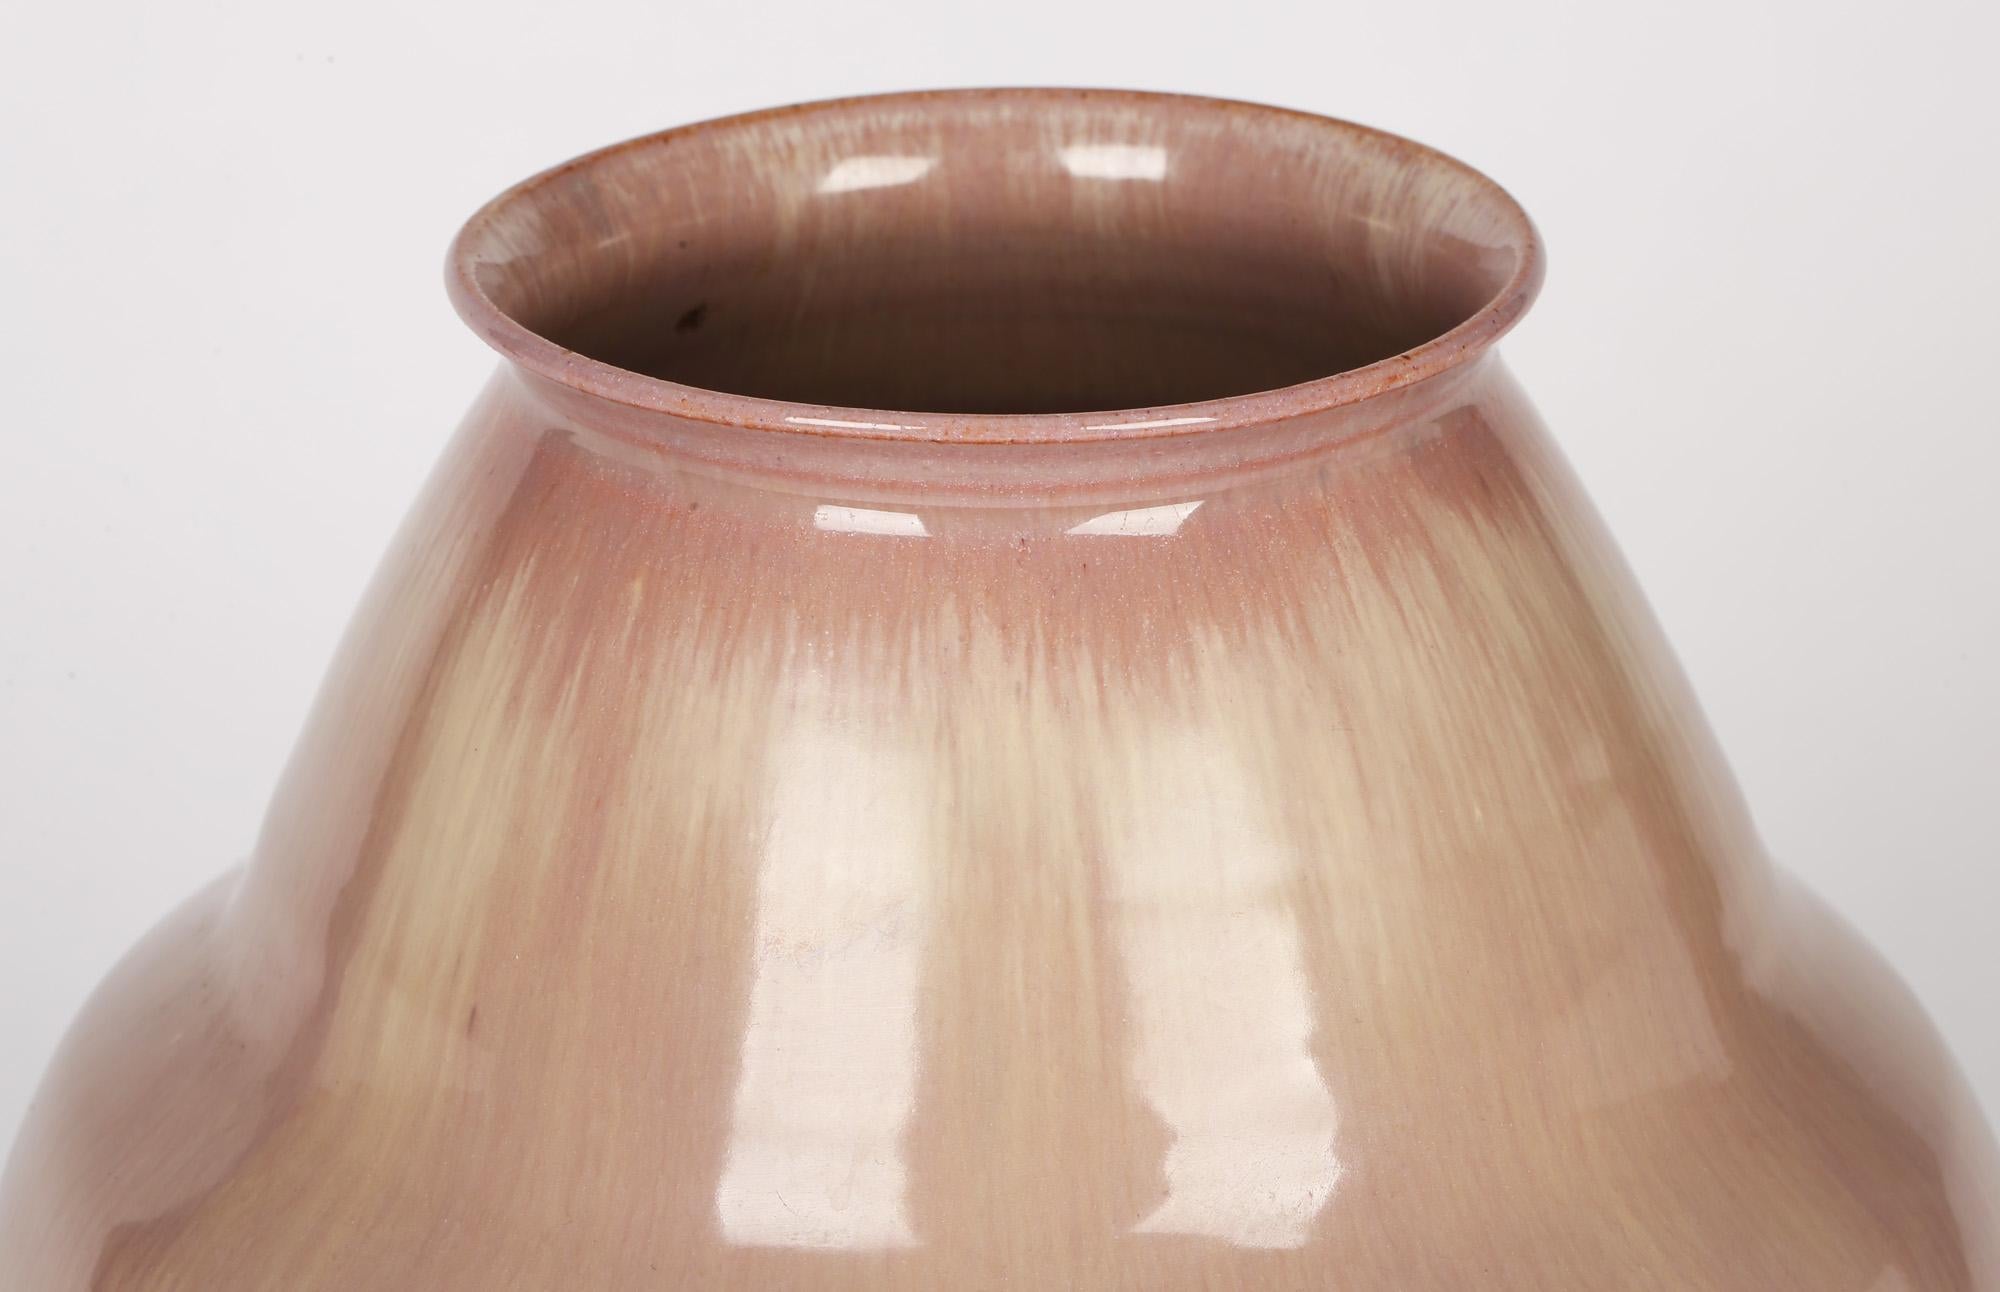 A large and attractive Dutch Art Deco vase decorated in pink streaked glazes by Willem Brouwer and made between 1920 and 1930. The vase is made in terracotta clay and is of rounded bulbous shape with an angled and shaped funnel top with a narrow